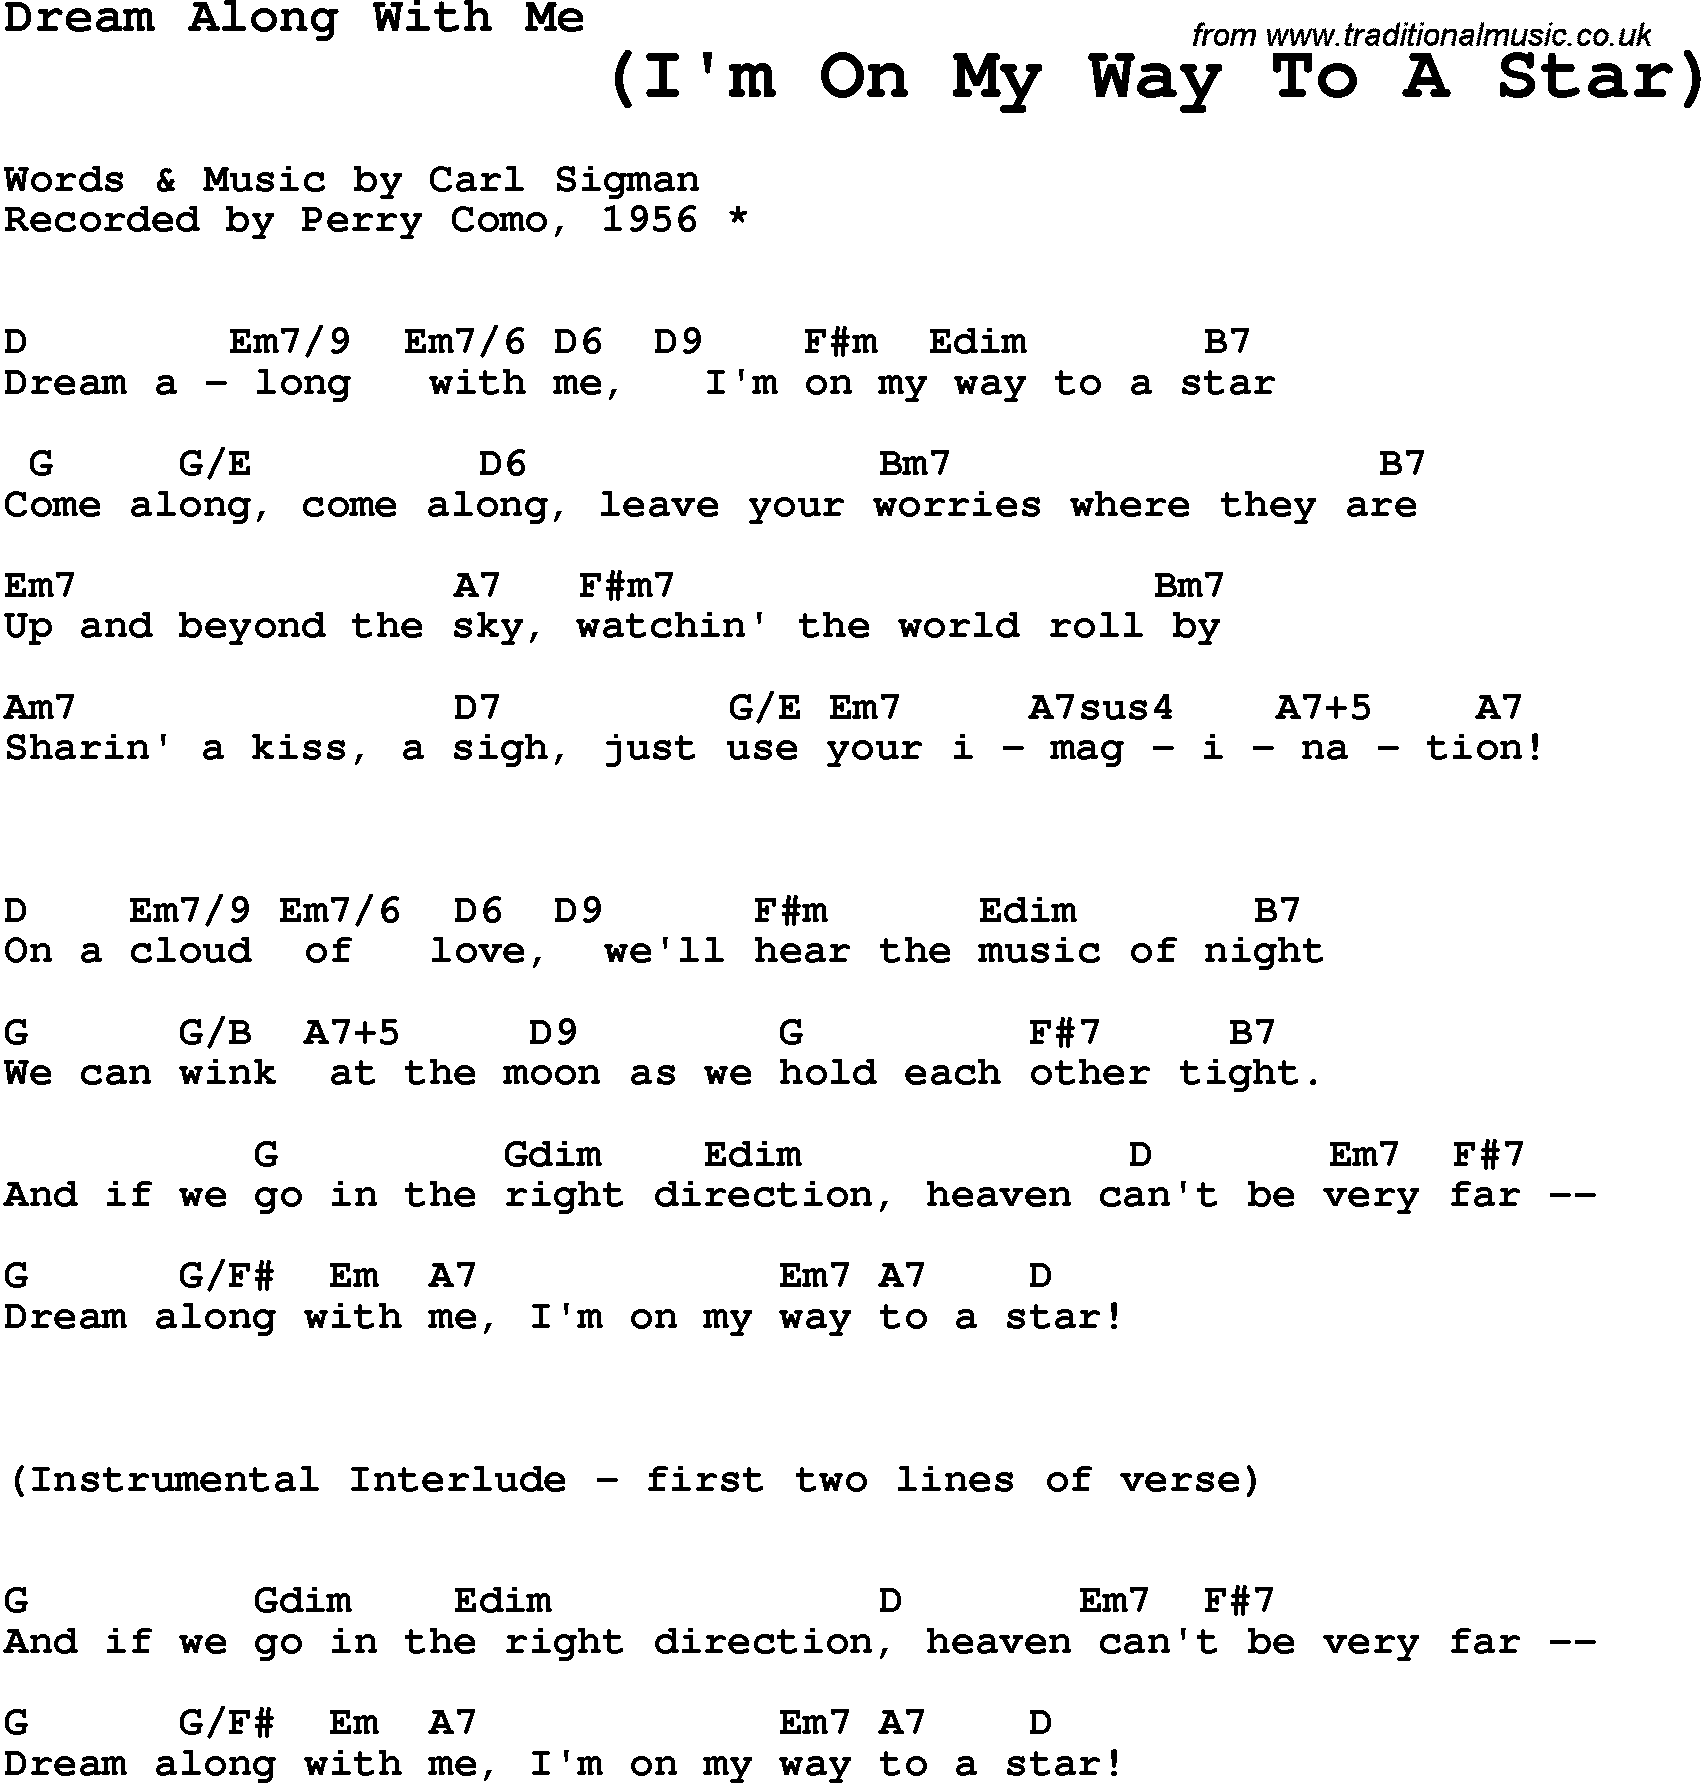 Song Lyrics with guitar chords for Dream Along With Me - Perry Como, 1956